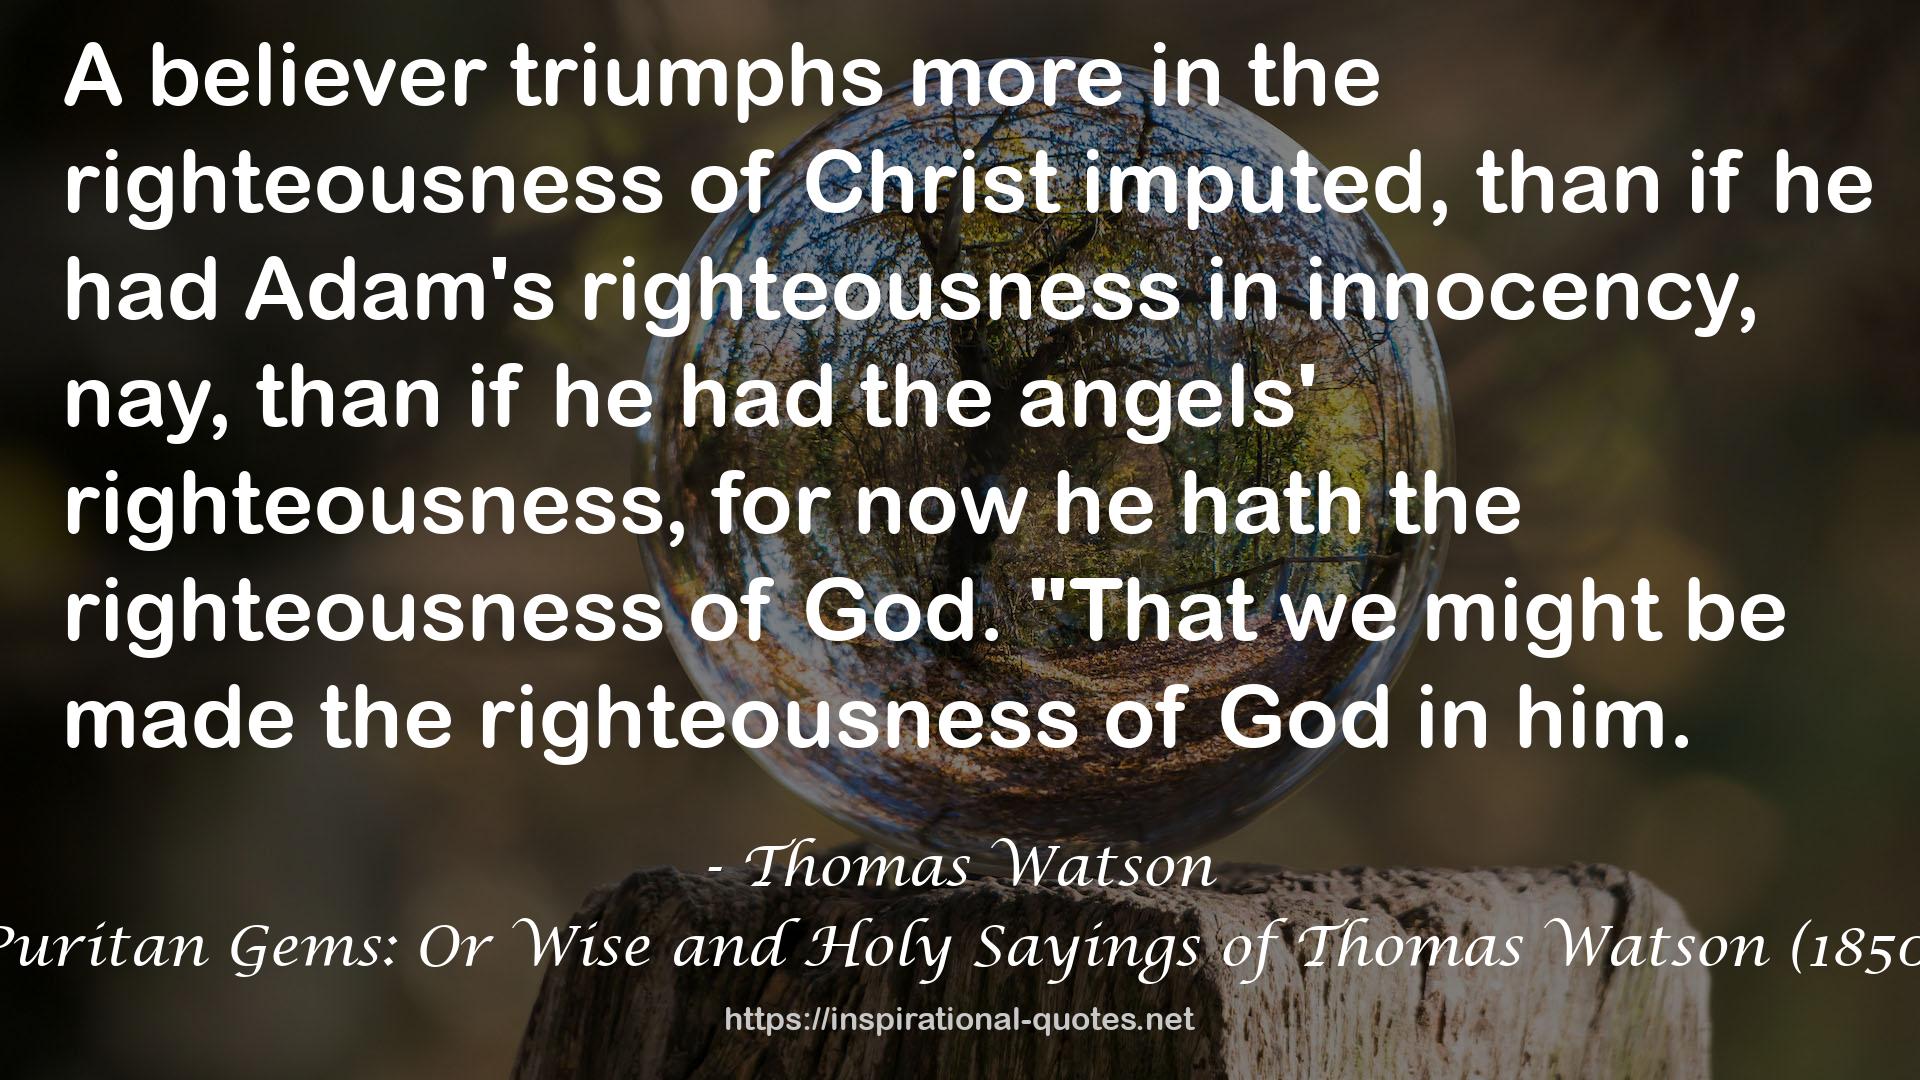 Puritan Gems: Or Wise and Holy Sayings of Thomas Watson (1850) QUOTES